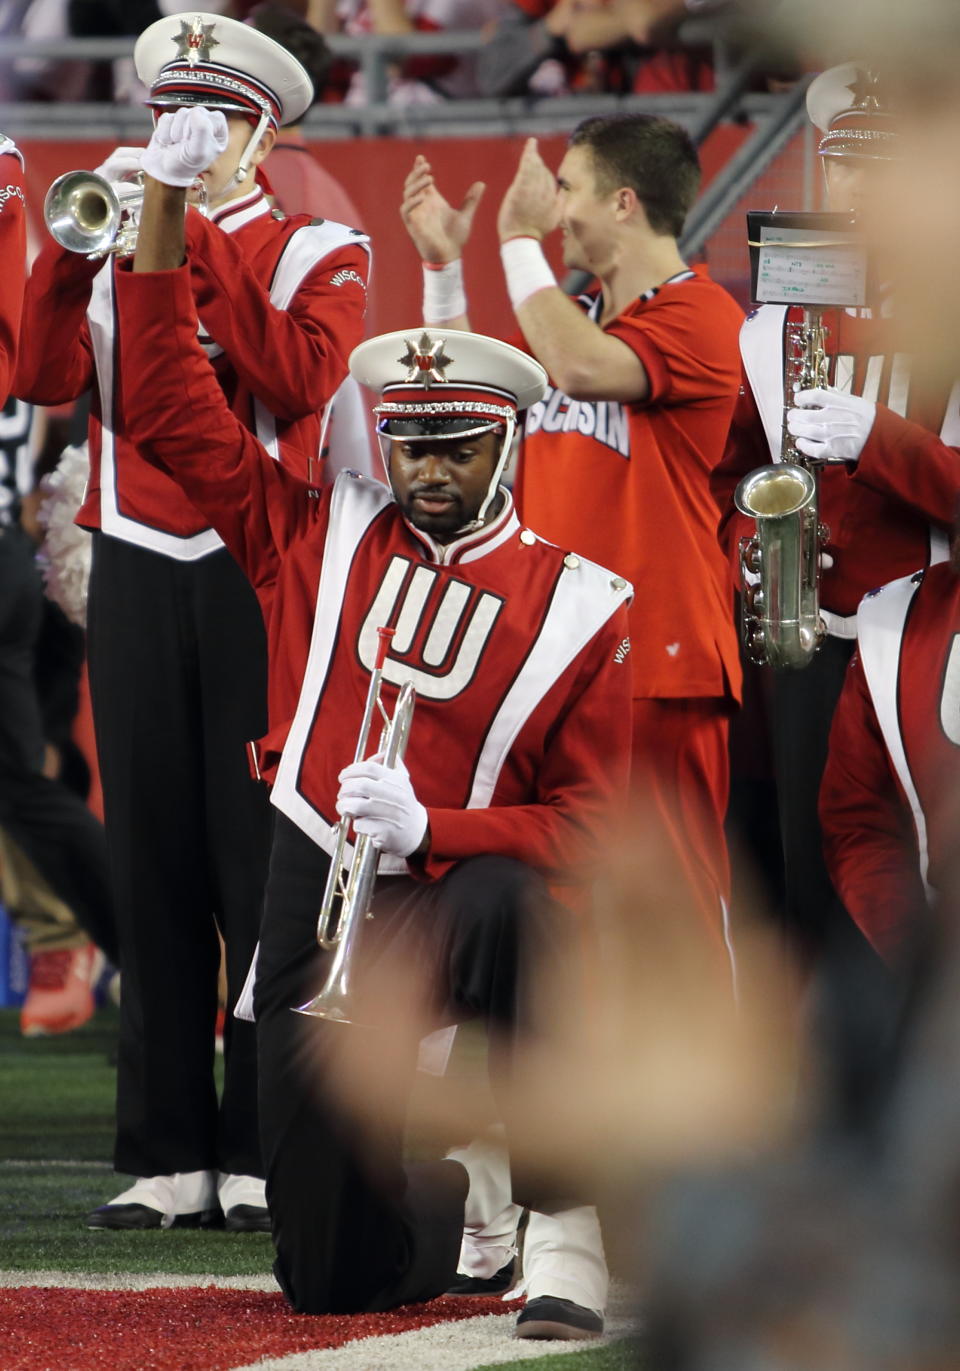 A Wisconsin Badger band member kneels during the playing of the National Anthem. Ohio State beat Wisconsin by a final score of 30-23 in overtime at Camp Randall Stadium in Madison, WI. on Oct. 15, 2016. (Photo by Patrick S Blood/Icon Sportswire via Getty Images)